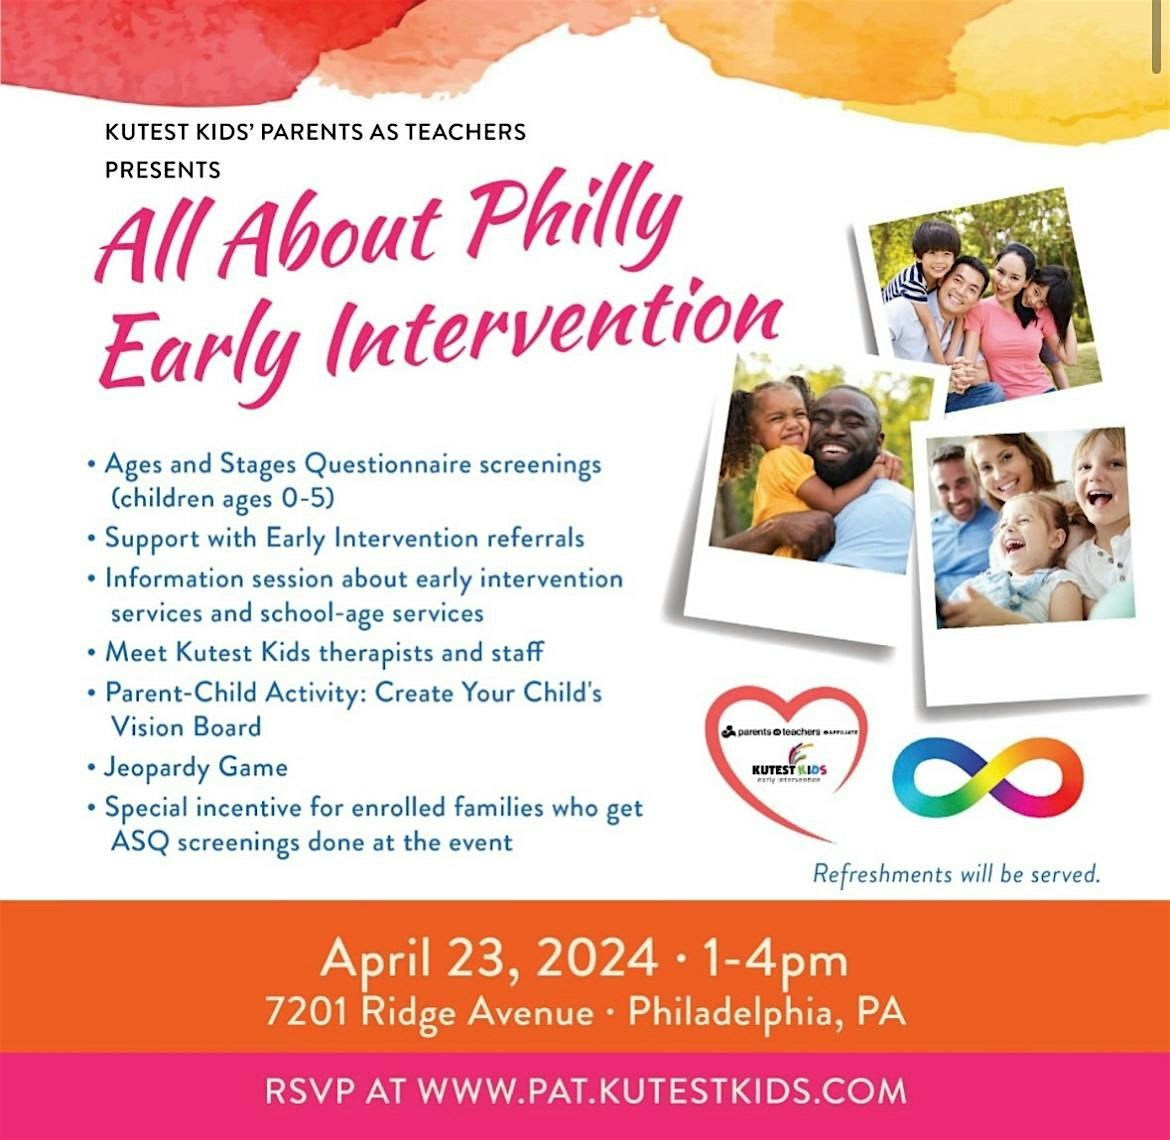 About Philadelphia Early Intervention